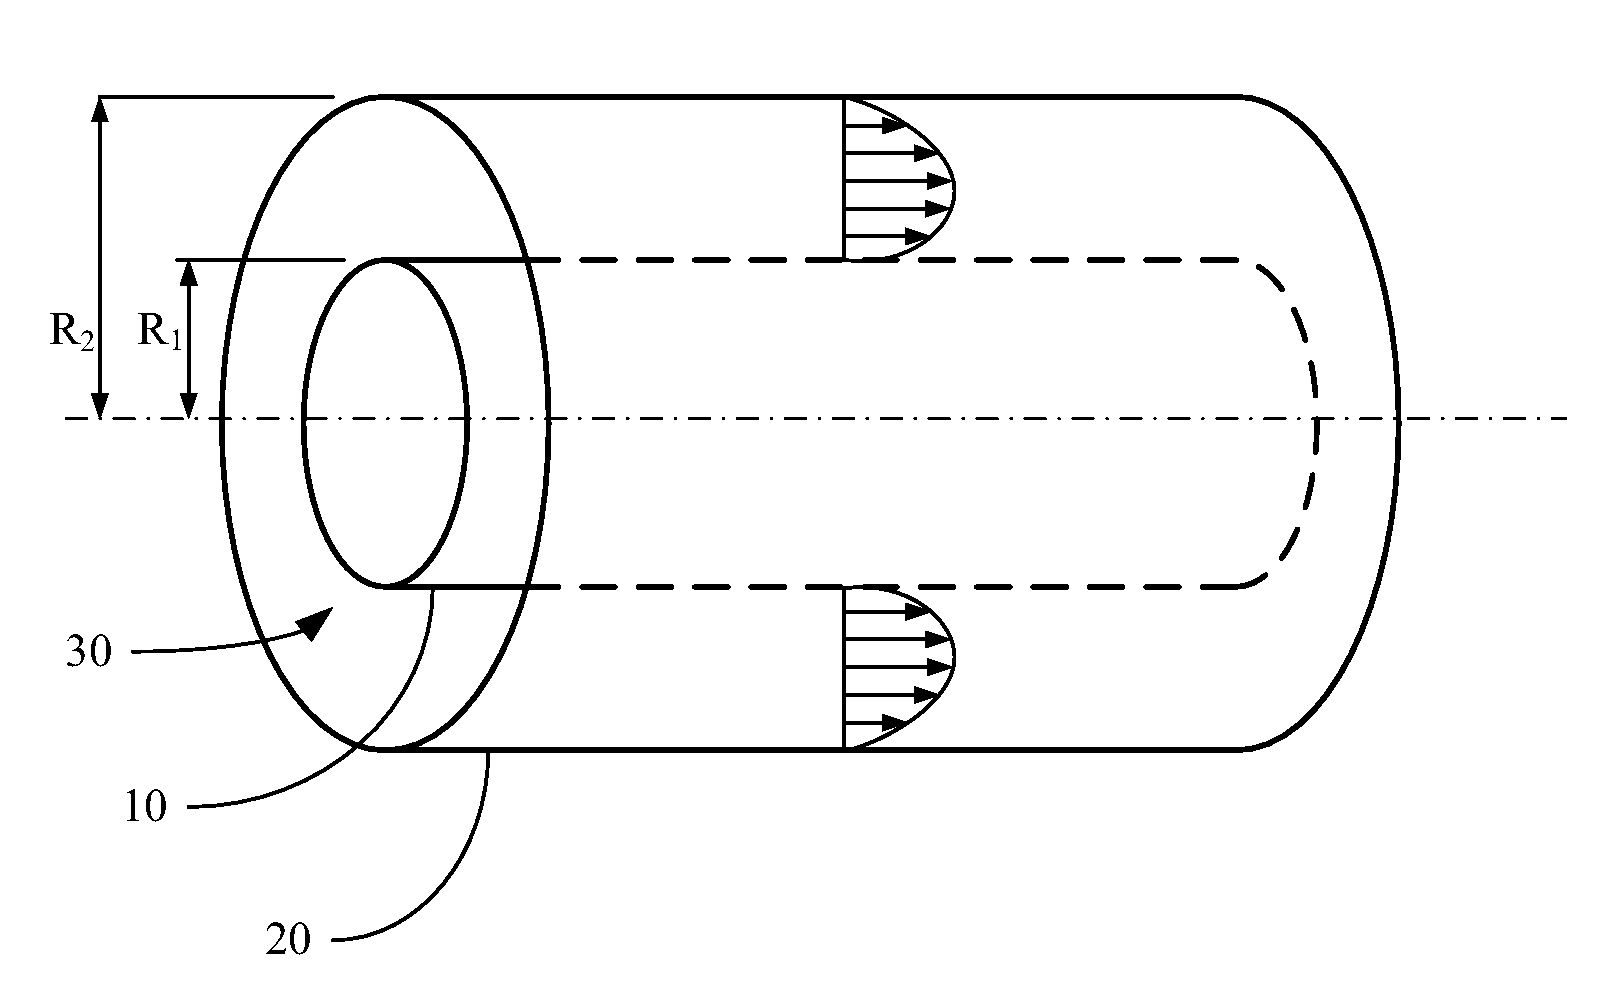 Method and System for Measuring the Zeta Potential of the Cylinder's Outer Surface